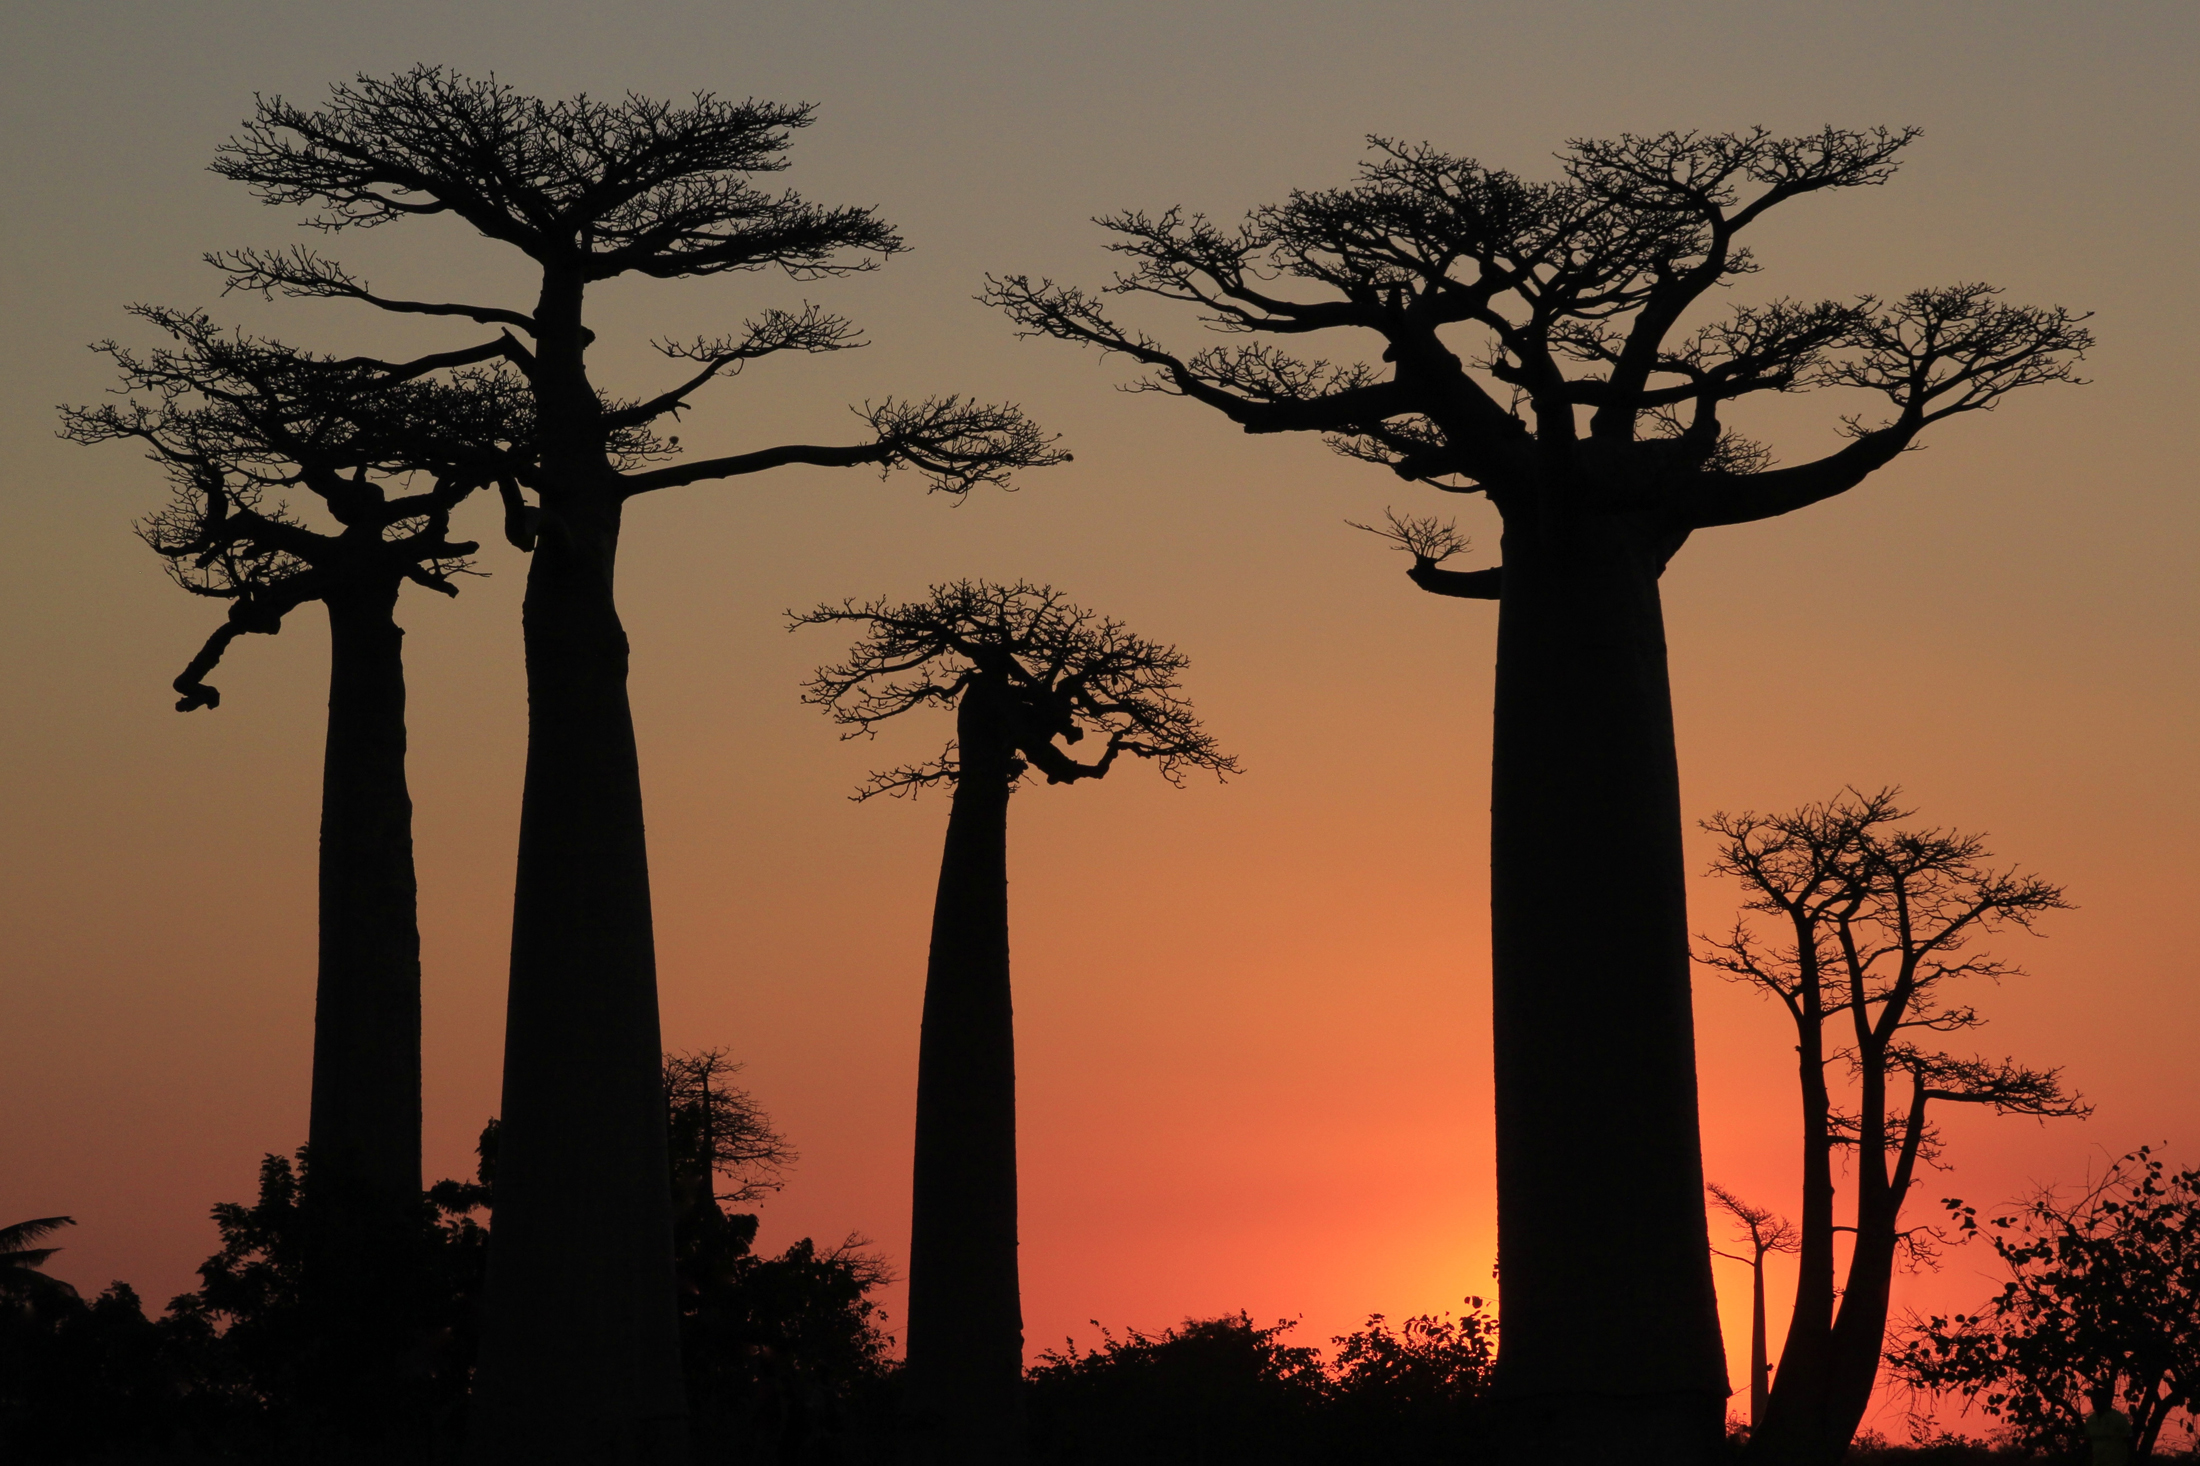 Where to See Lemurs, Chameleons, and Baobabs in Madagascar